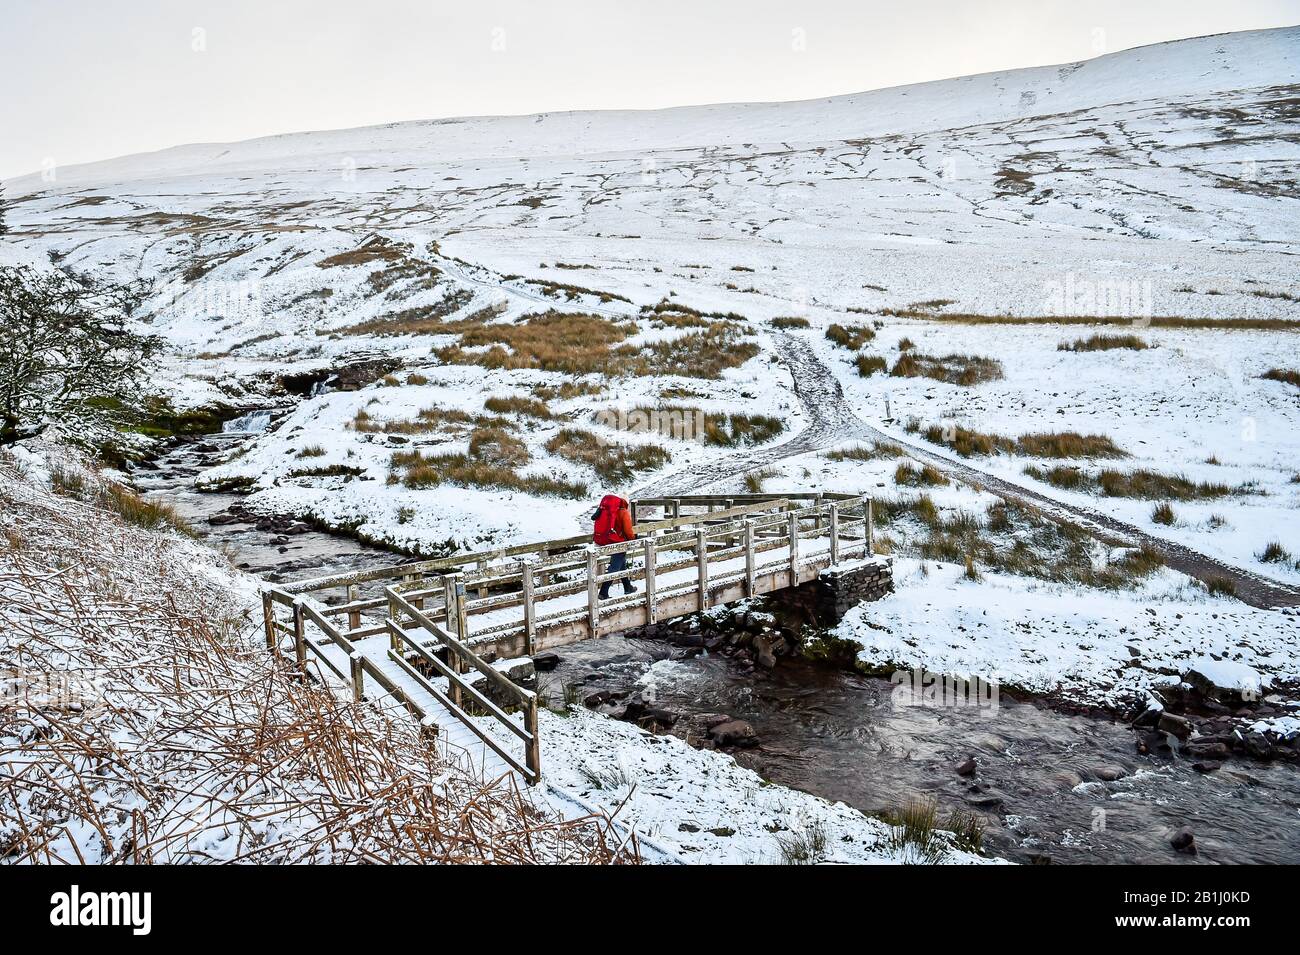 A walker crosses a bridge over a stream on the footpath towards Pen y Fan mountain on Brecon Beacons National Park, Wales, after temperatures plummeted overnight across Britain, and forecasters warned of more ice and snow over the next 24 hours. Stock Photo